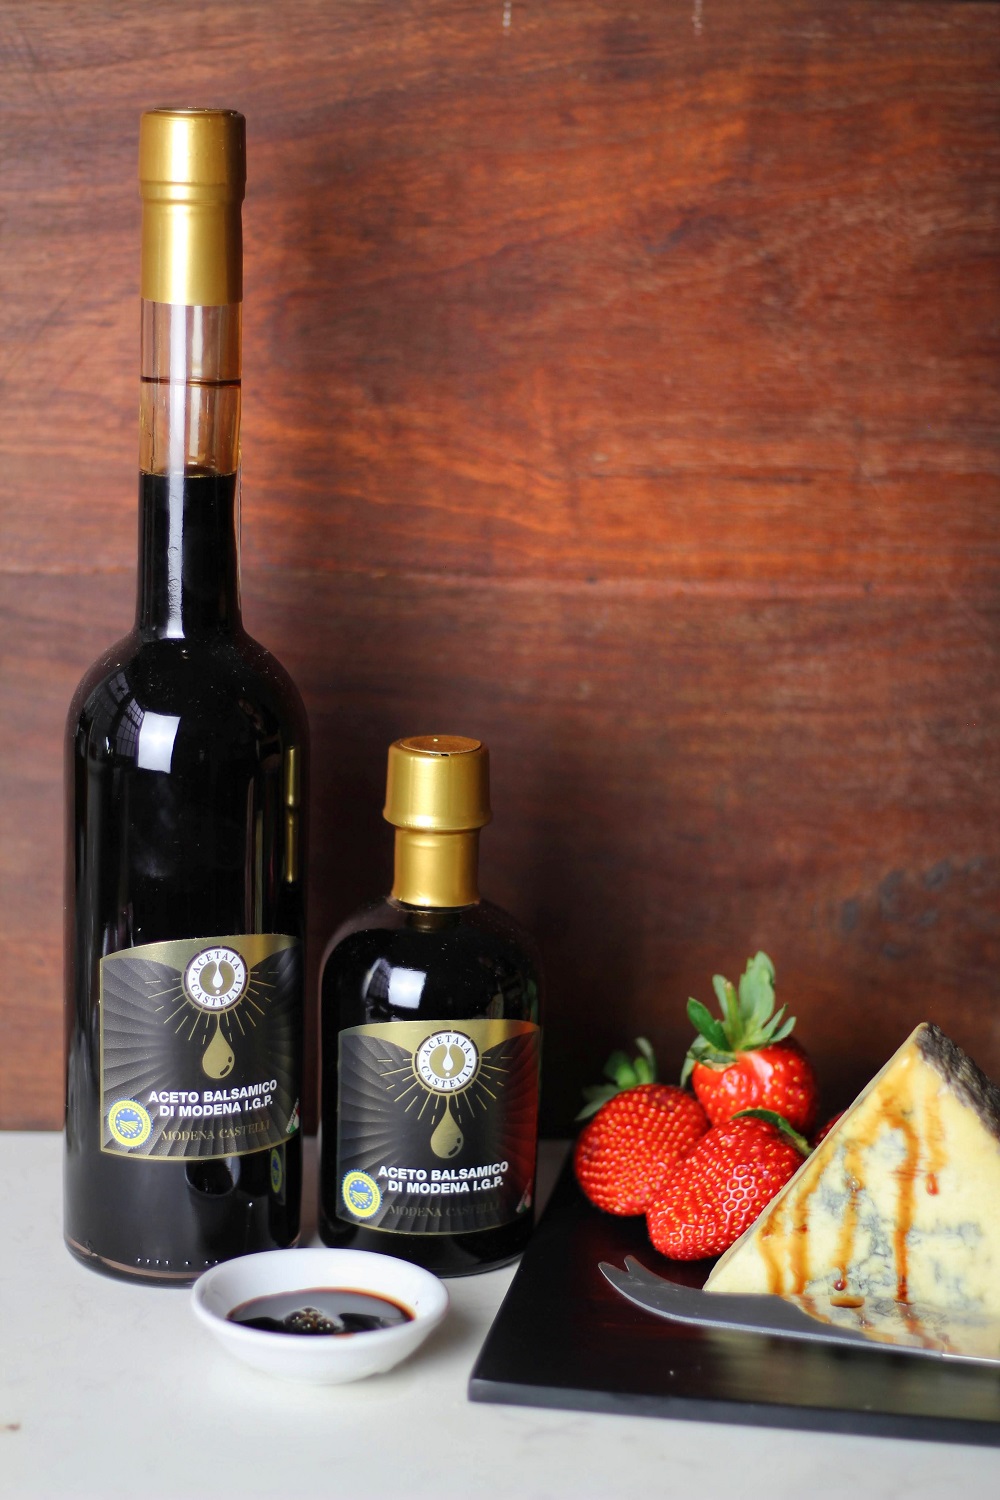 Aged IGP Balsamic - Gold